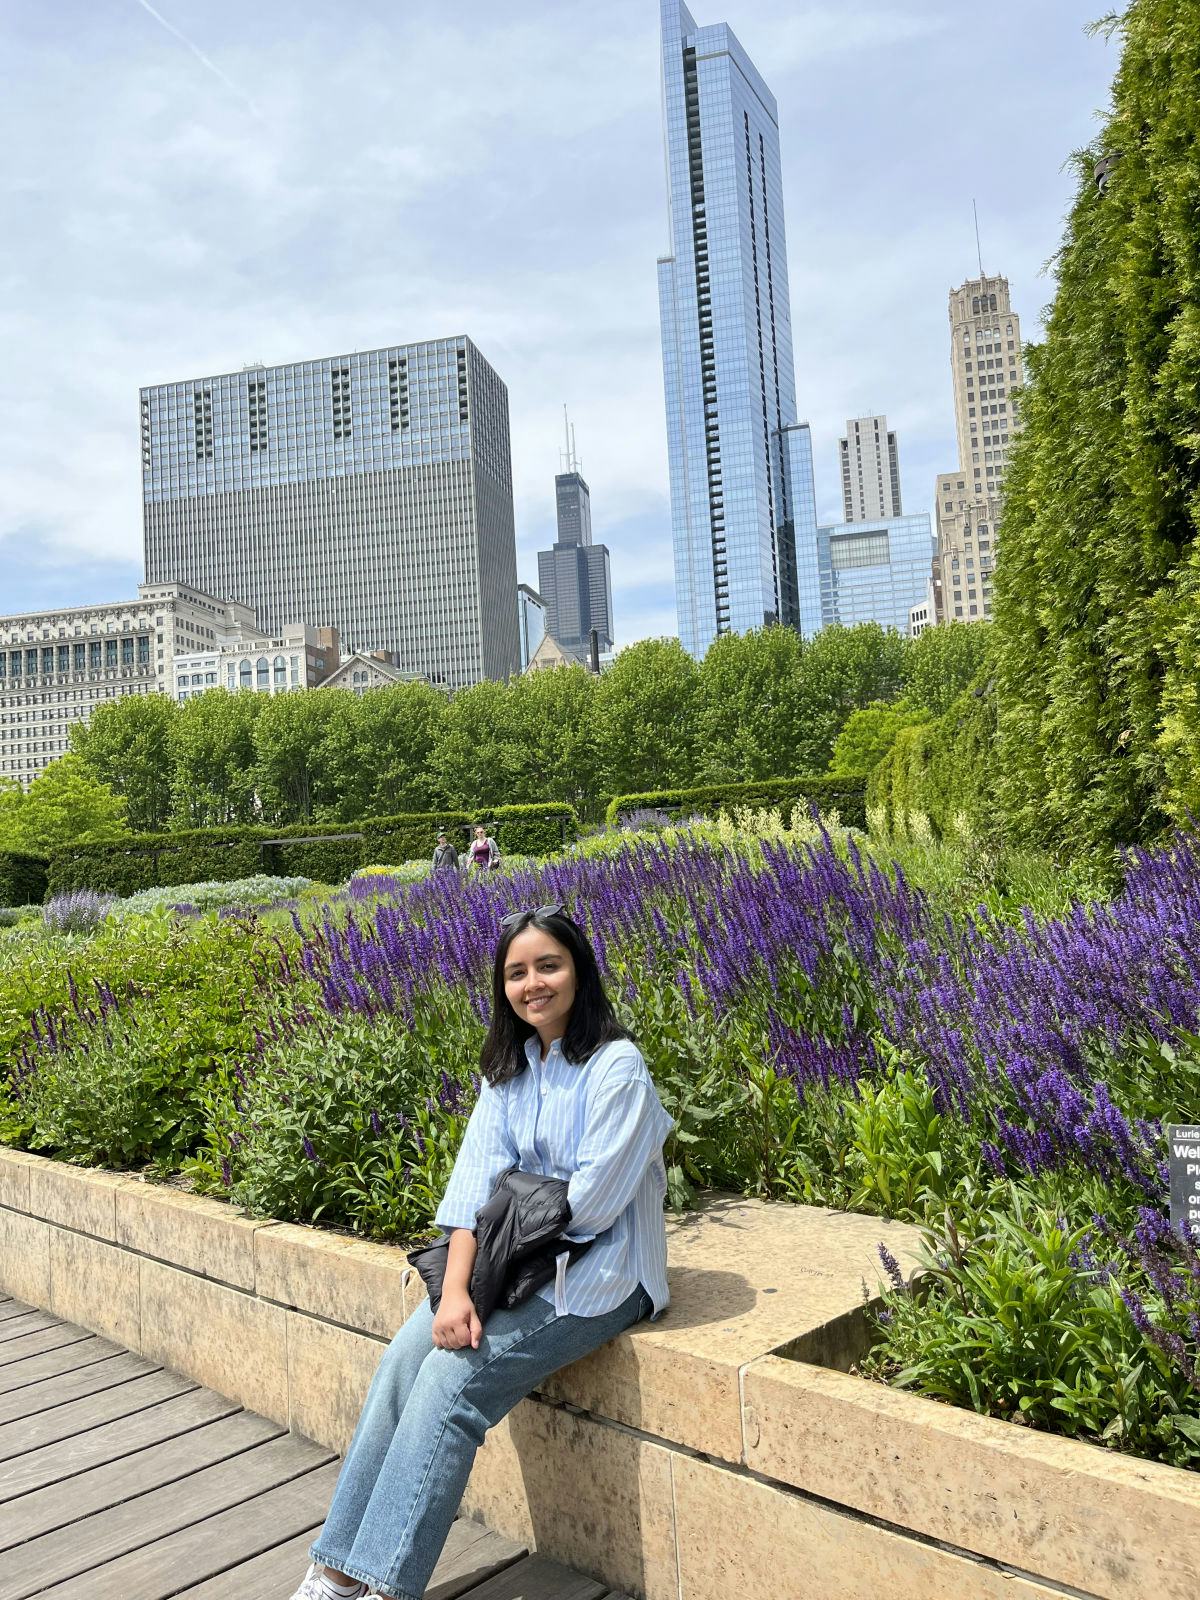 Rhythm Goyal sits in front of purple flowers with the Chicago skyline in the background.